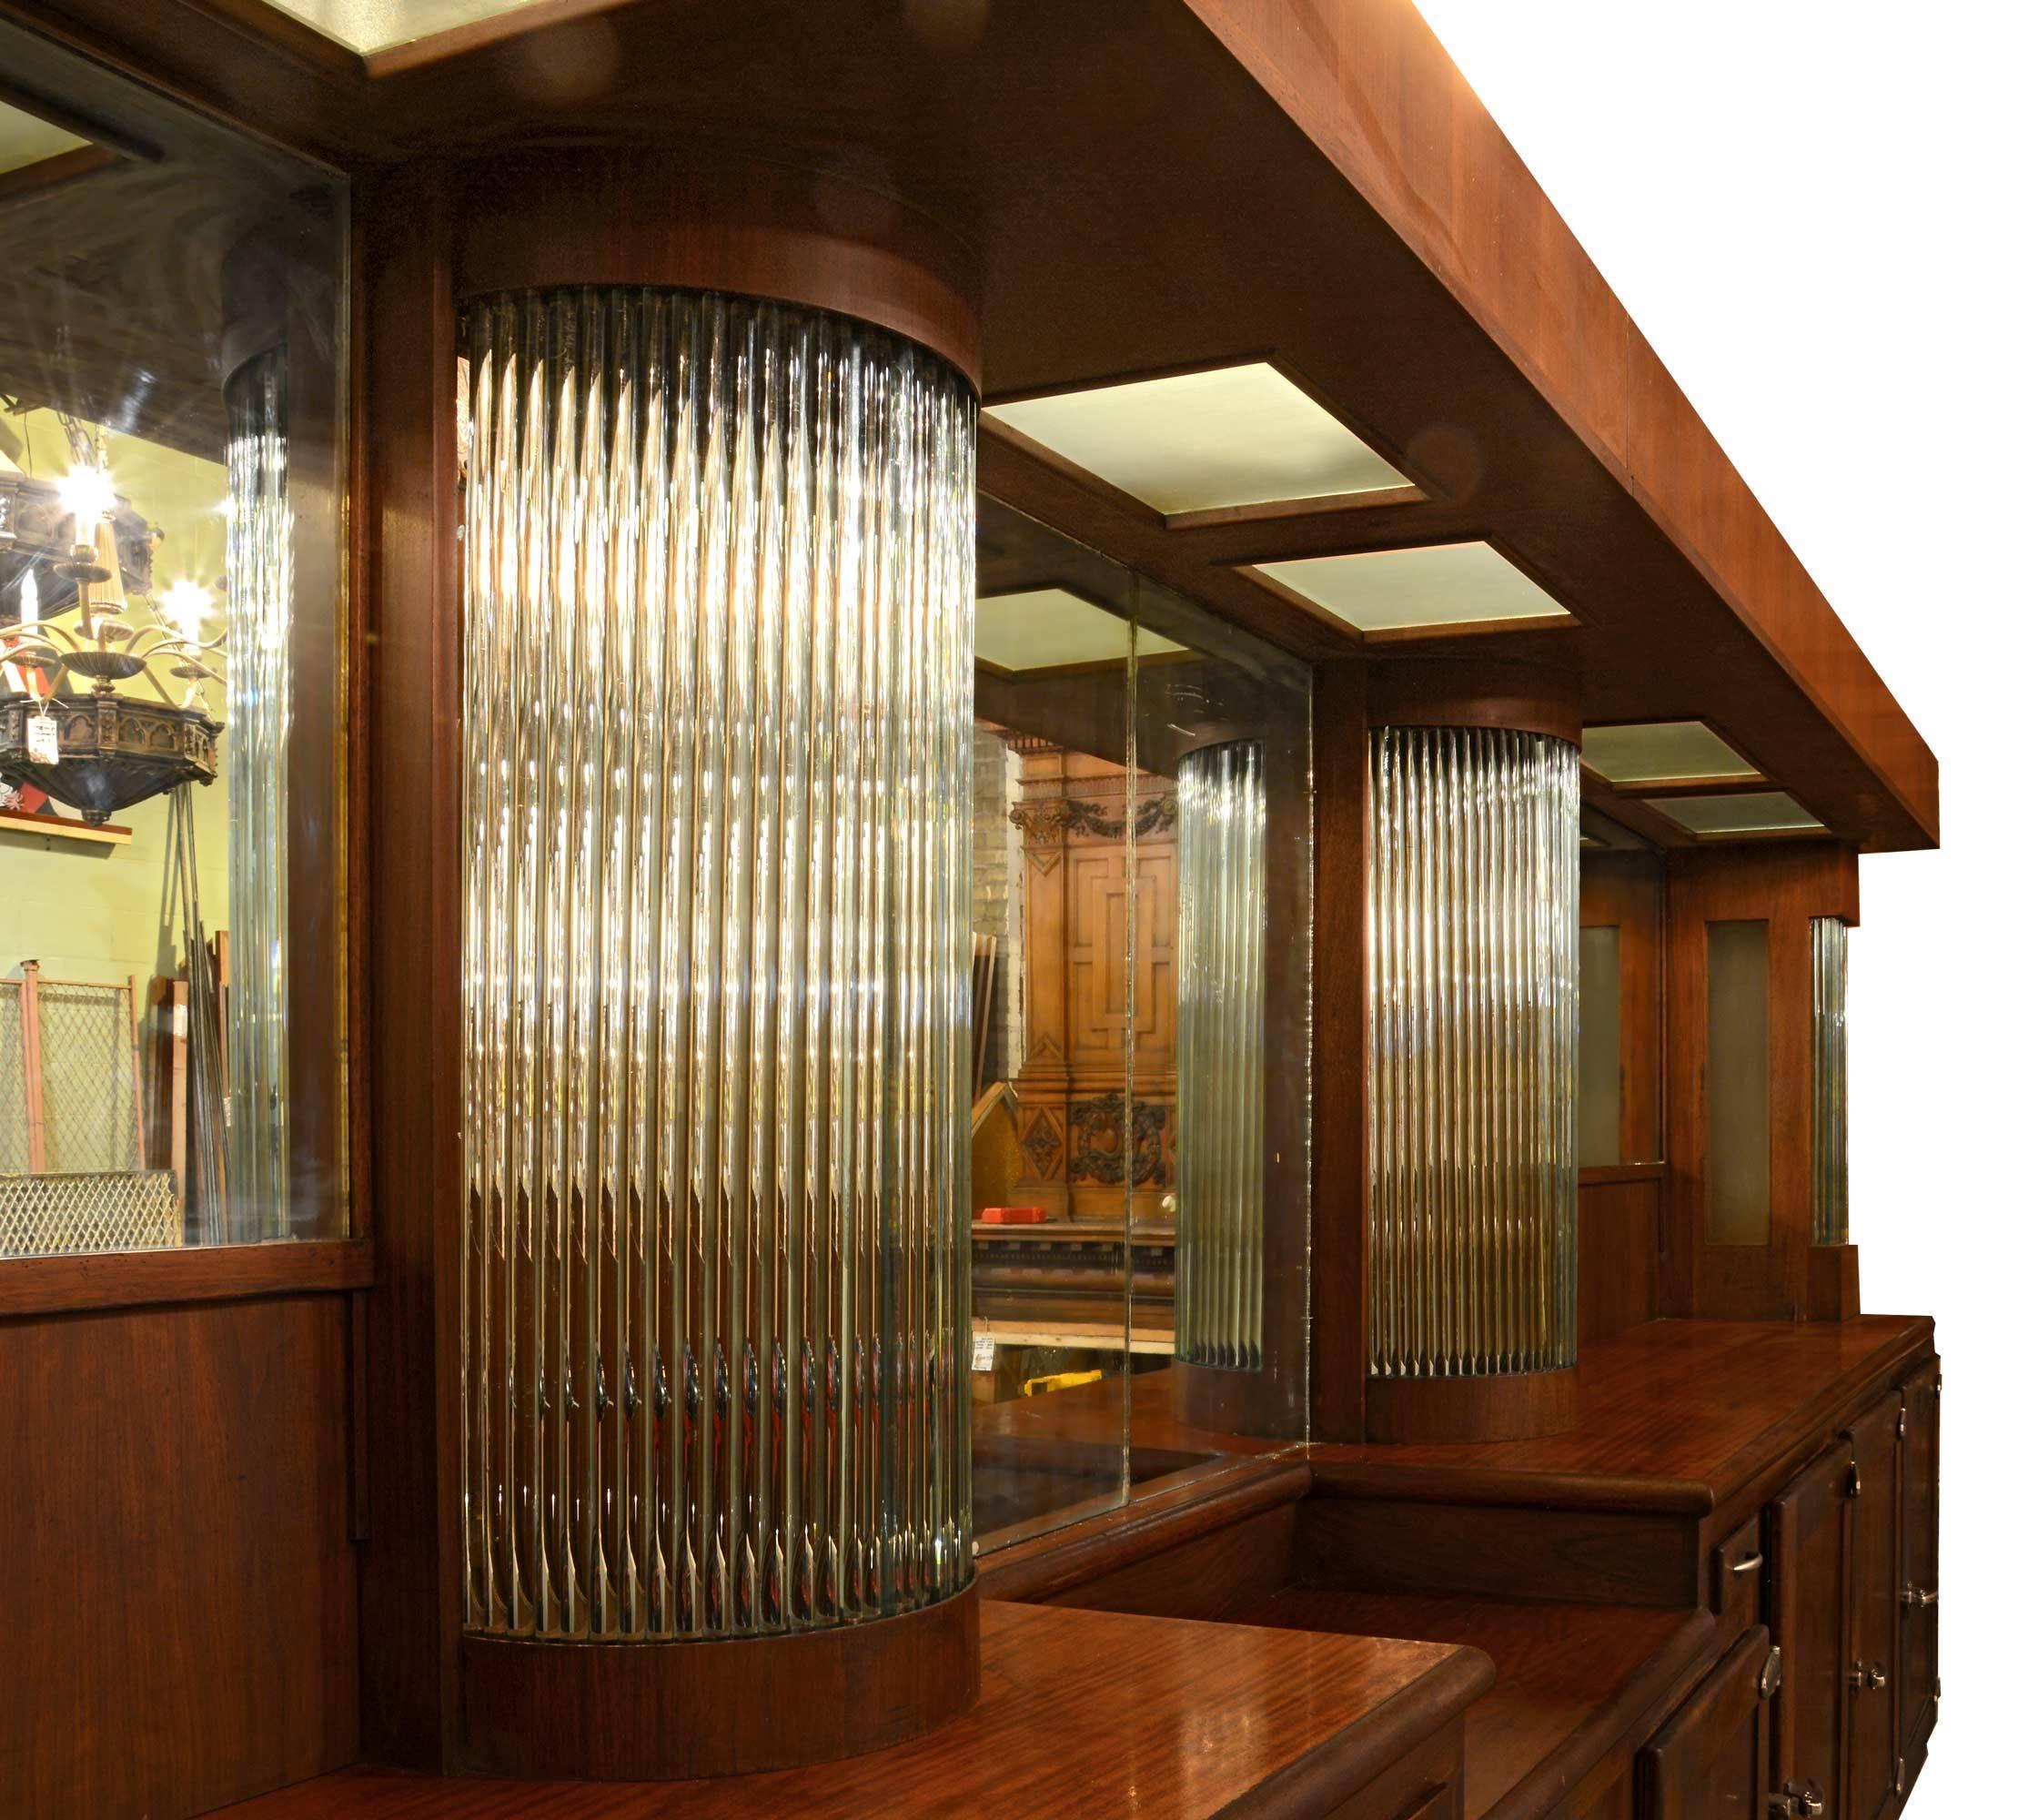 This gorgeous mahogany bar with a wraparound L-shaped counter is from an American Legion. The back bar features mirrors, plenty of storage, and rows of glass rods to diffuse light while you're slinging drinks!

Measures: Back bar: 93" tall x